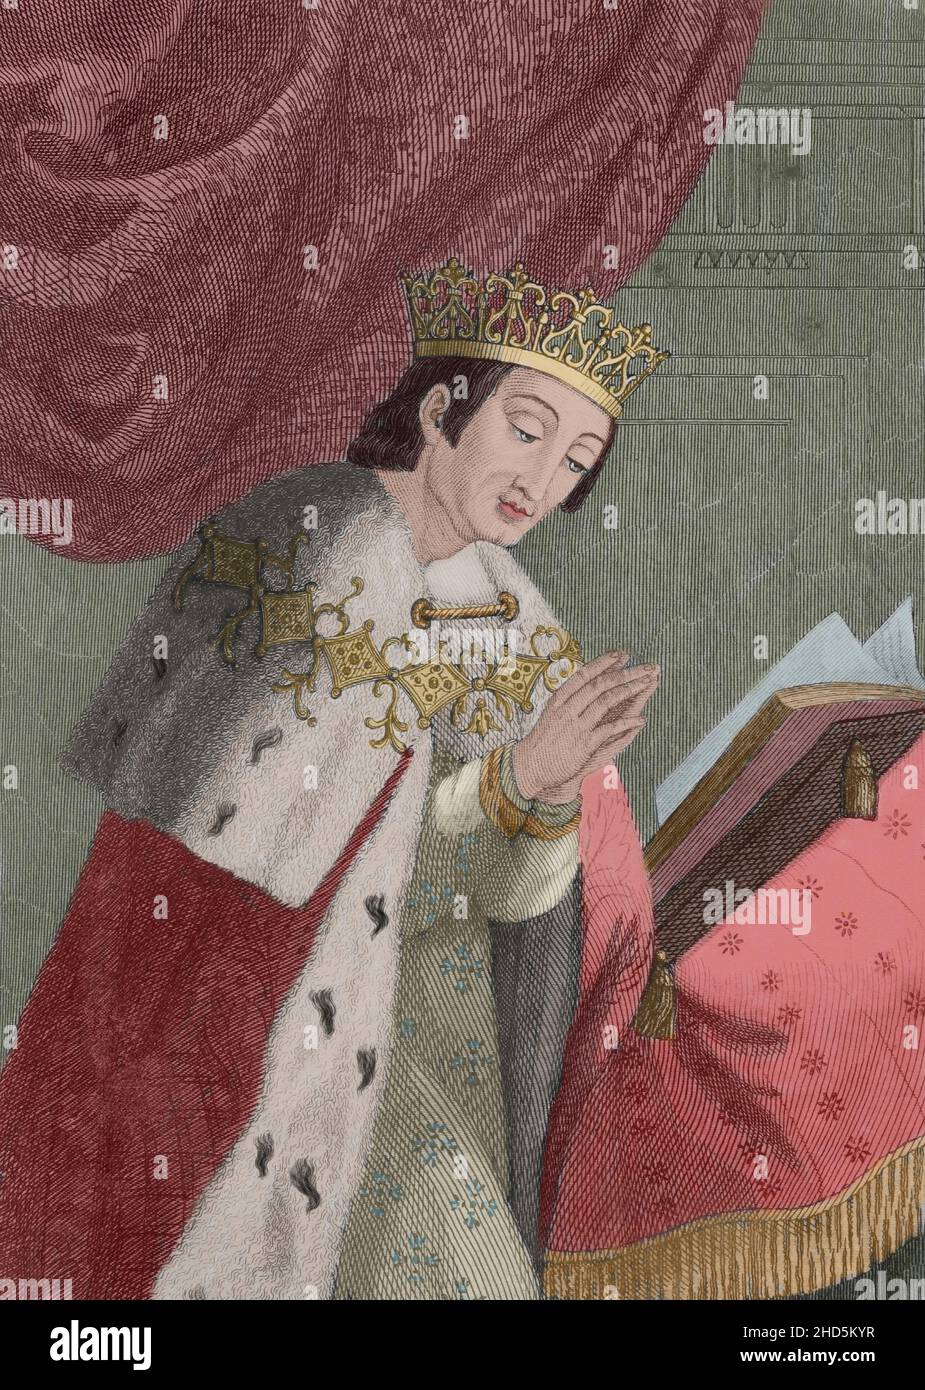 Alfonso VIII of Castile (1155-1214), called the Noble or the one of the Navas. King of Castile from 1159 and King of Toledo. Portrait. Engraving by Antonio Roca. Later colouration. Las Glorias Nacionales, 1853. Later colouration. Author: Antonio Roca Sallent (1813-1864). Spanish engraver. Stock Photo